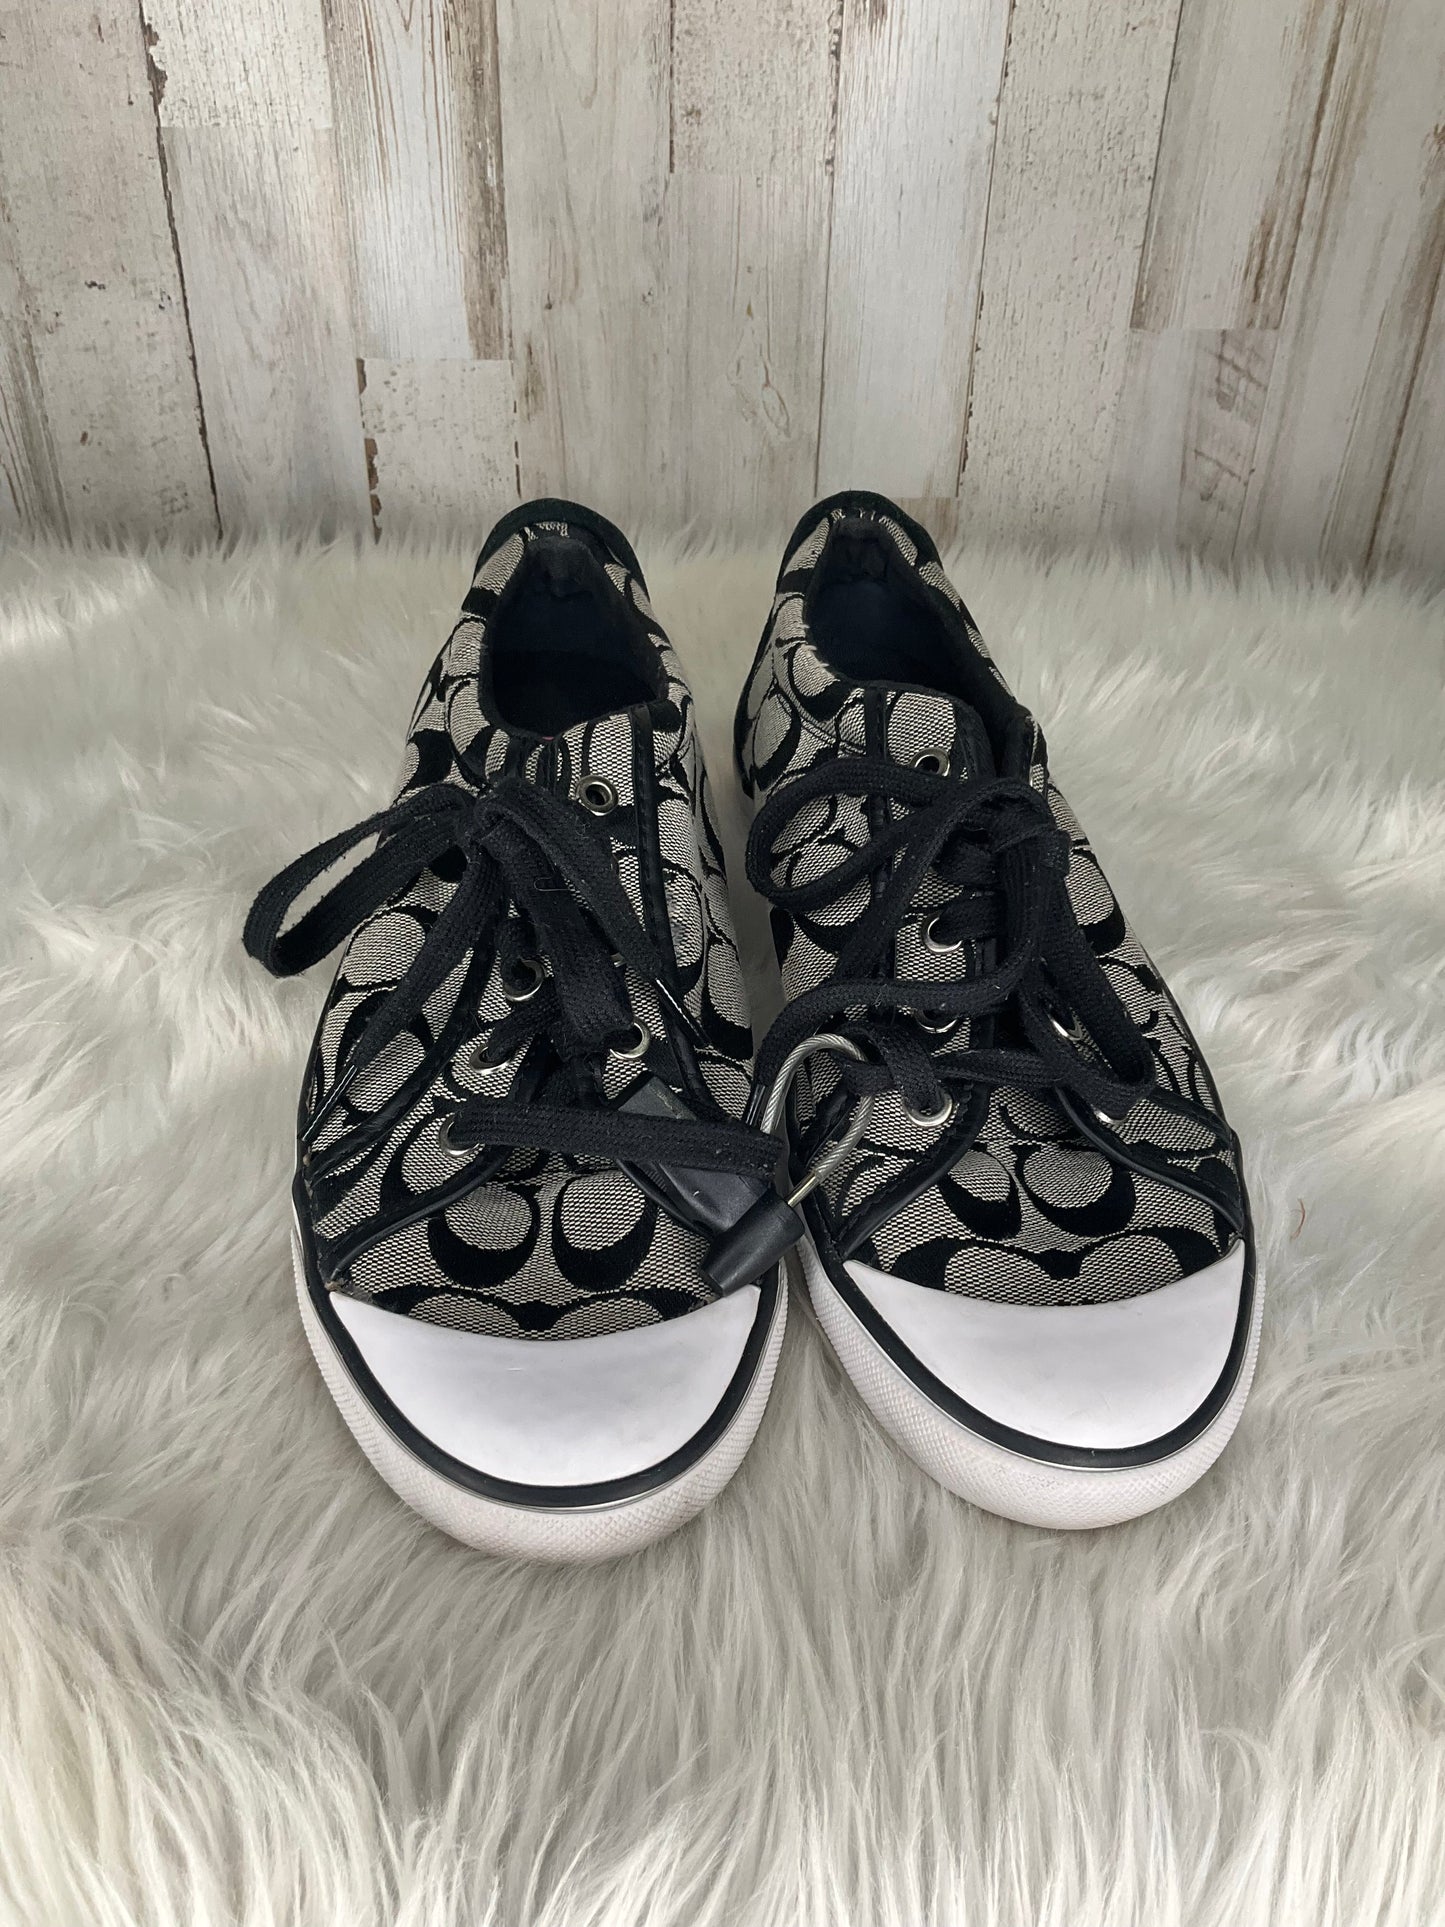 Black & Grey Shoes Sneakers Coach, Size 9